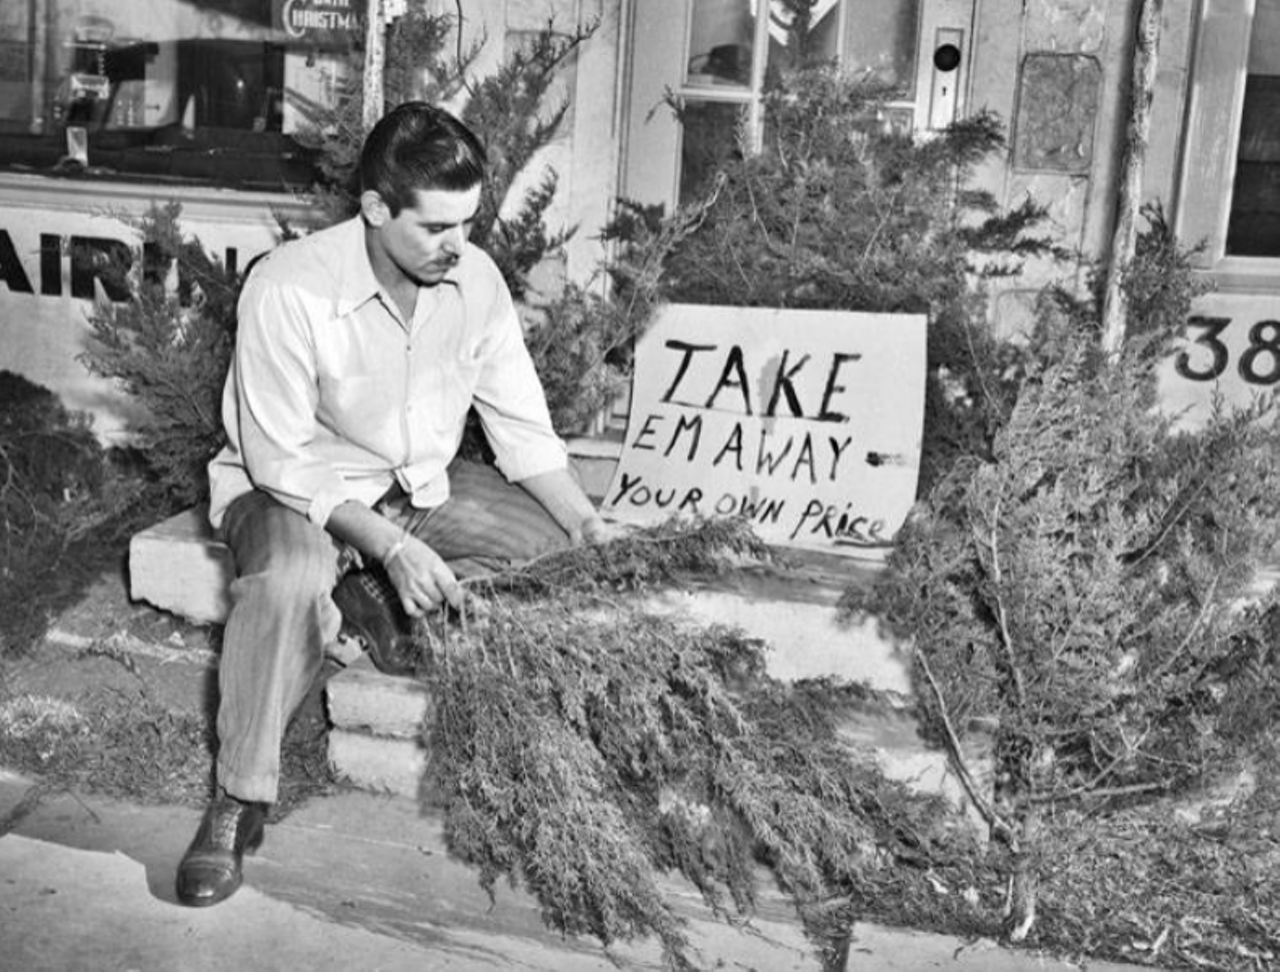 In the 500 block of Fredericksburg Road, there was a lot where you could get your own Christmas tree. Here you can see Richard Mendoza picking his tree. Hopefully he got a good deal.